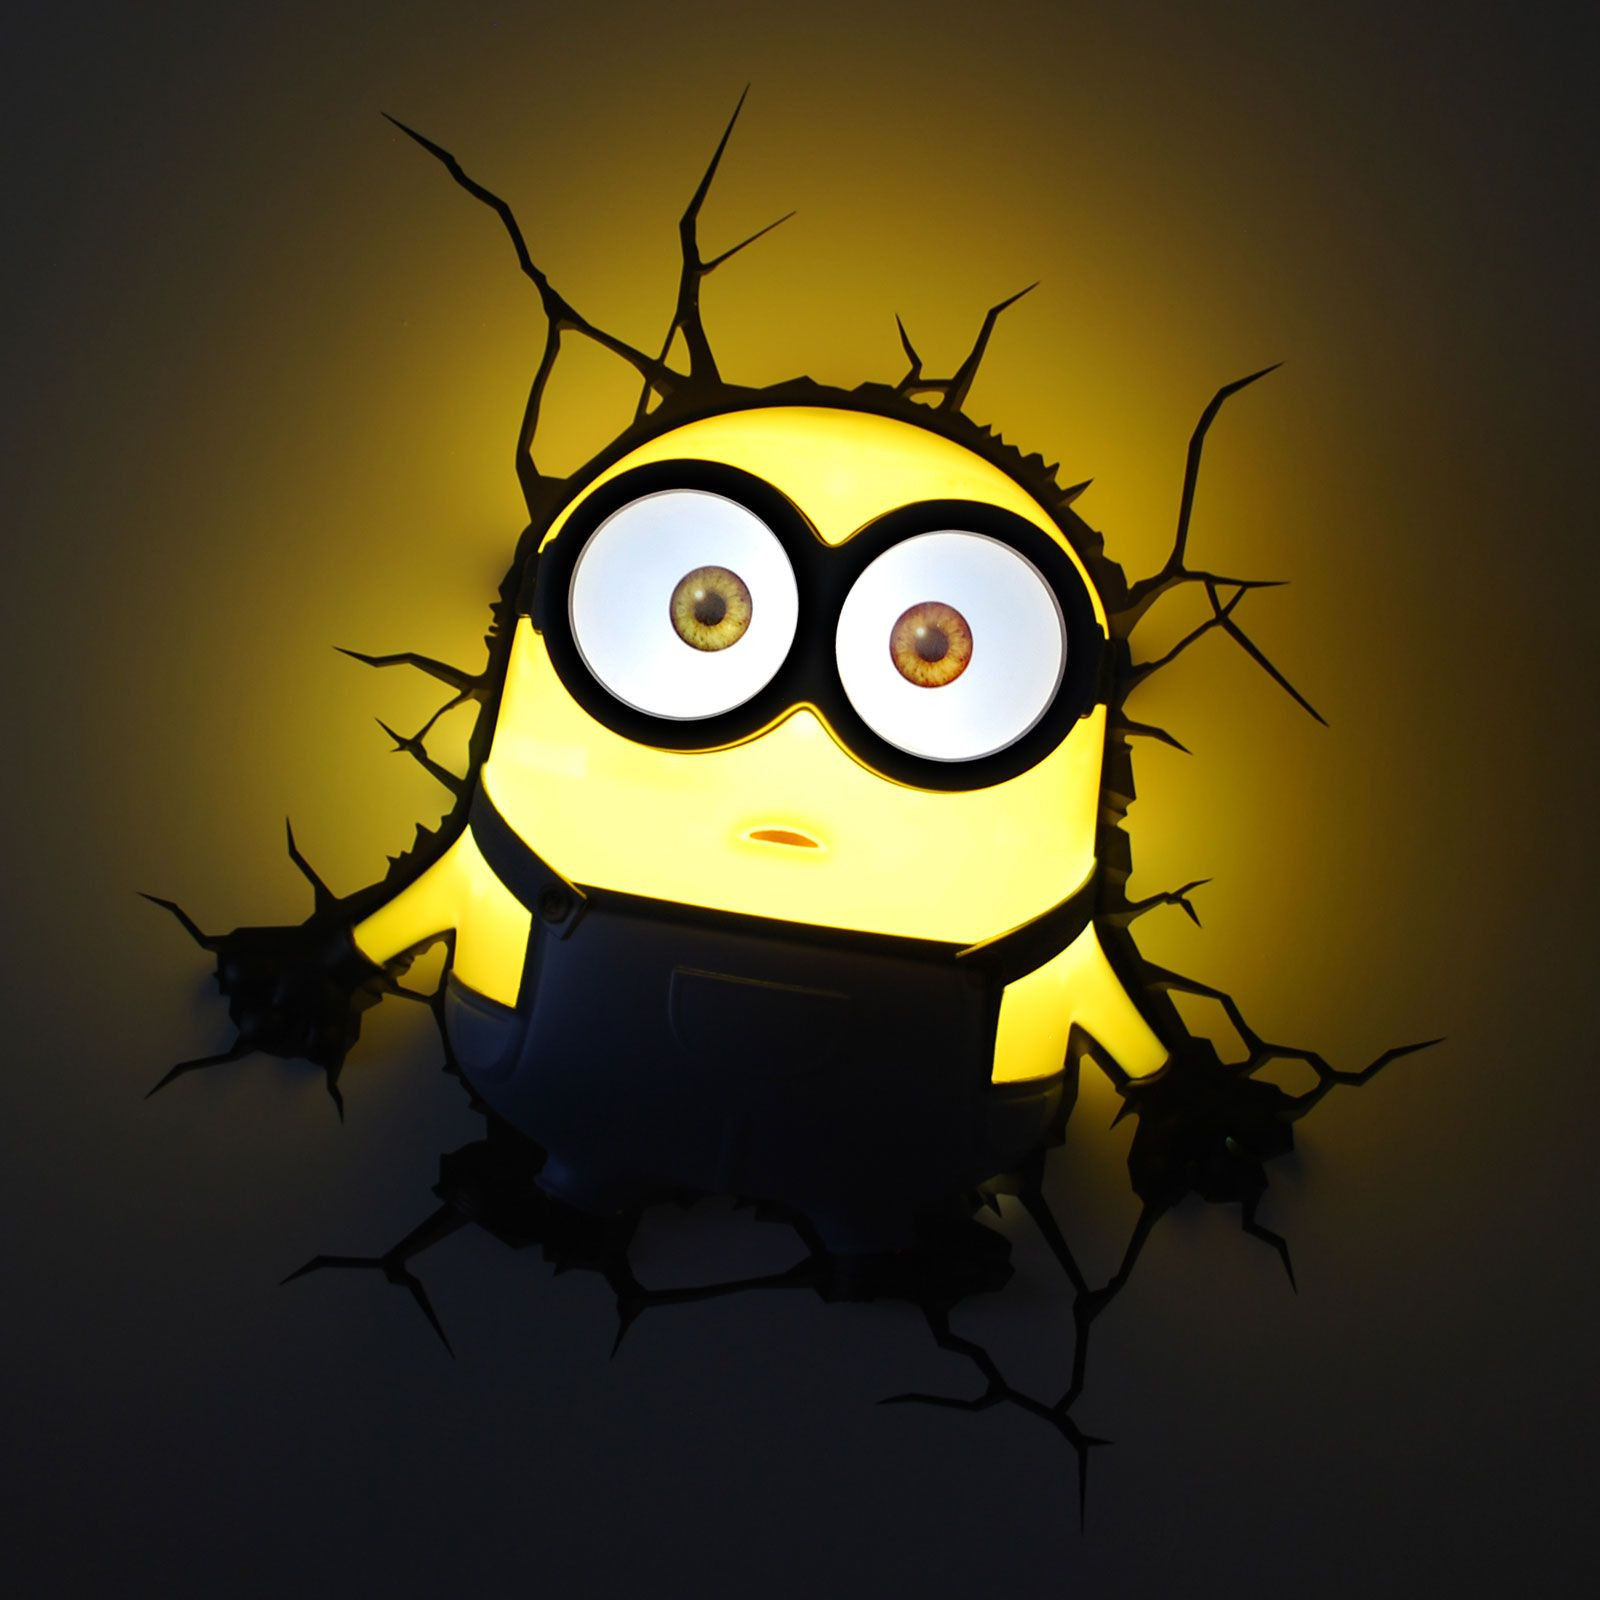 Childrens Bedroom Light
 MINIONS 3D LED WALL LIGHTS NEW KIDS BEDROOM ACCESSORY 